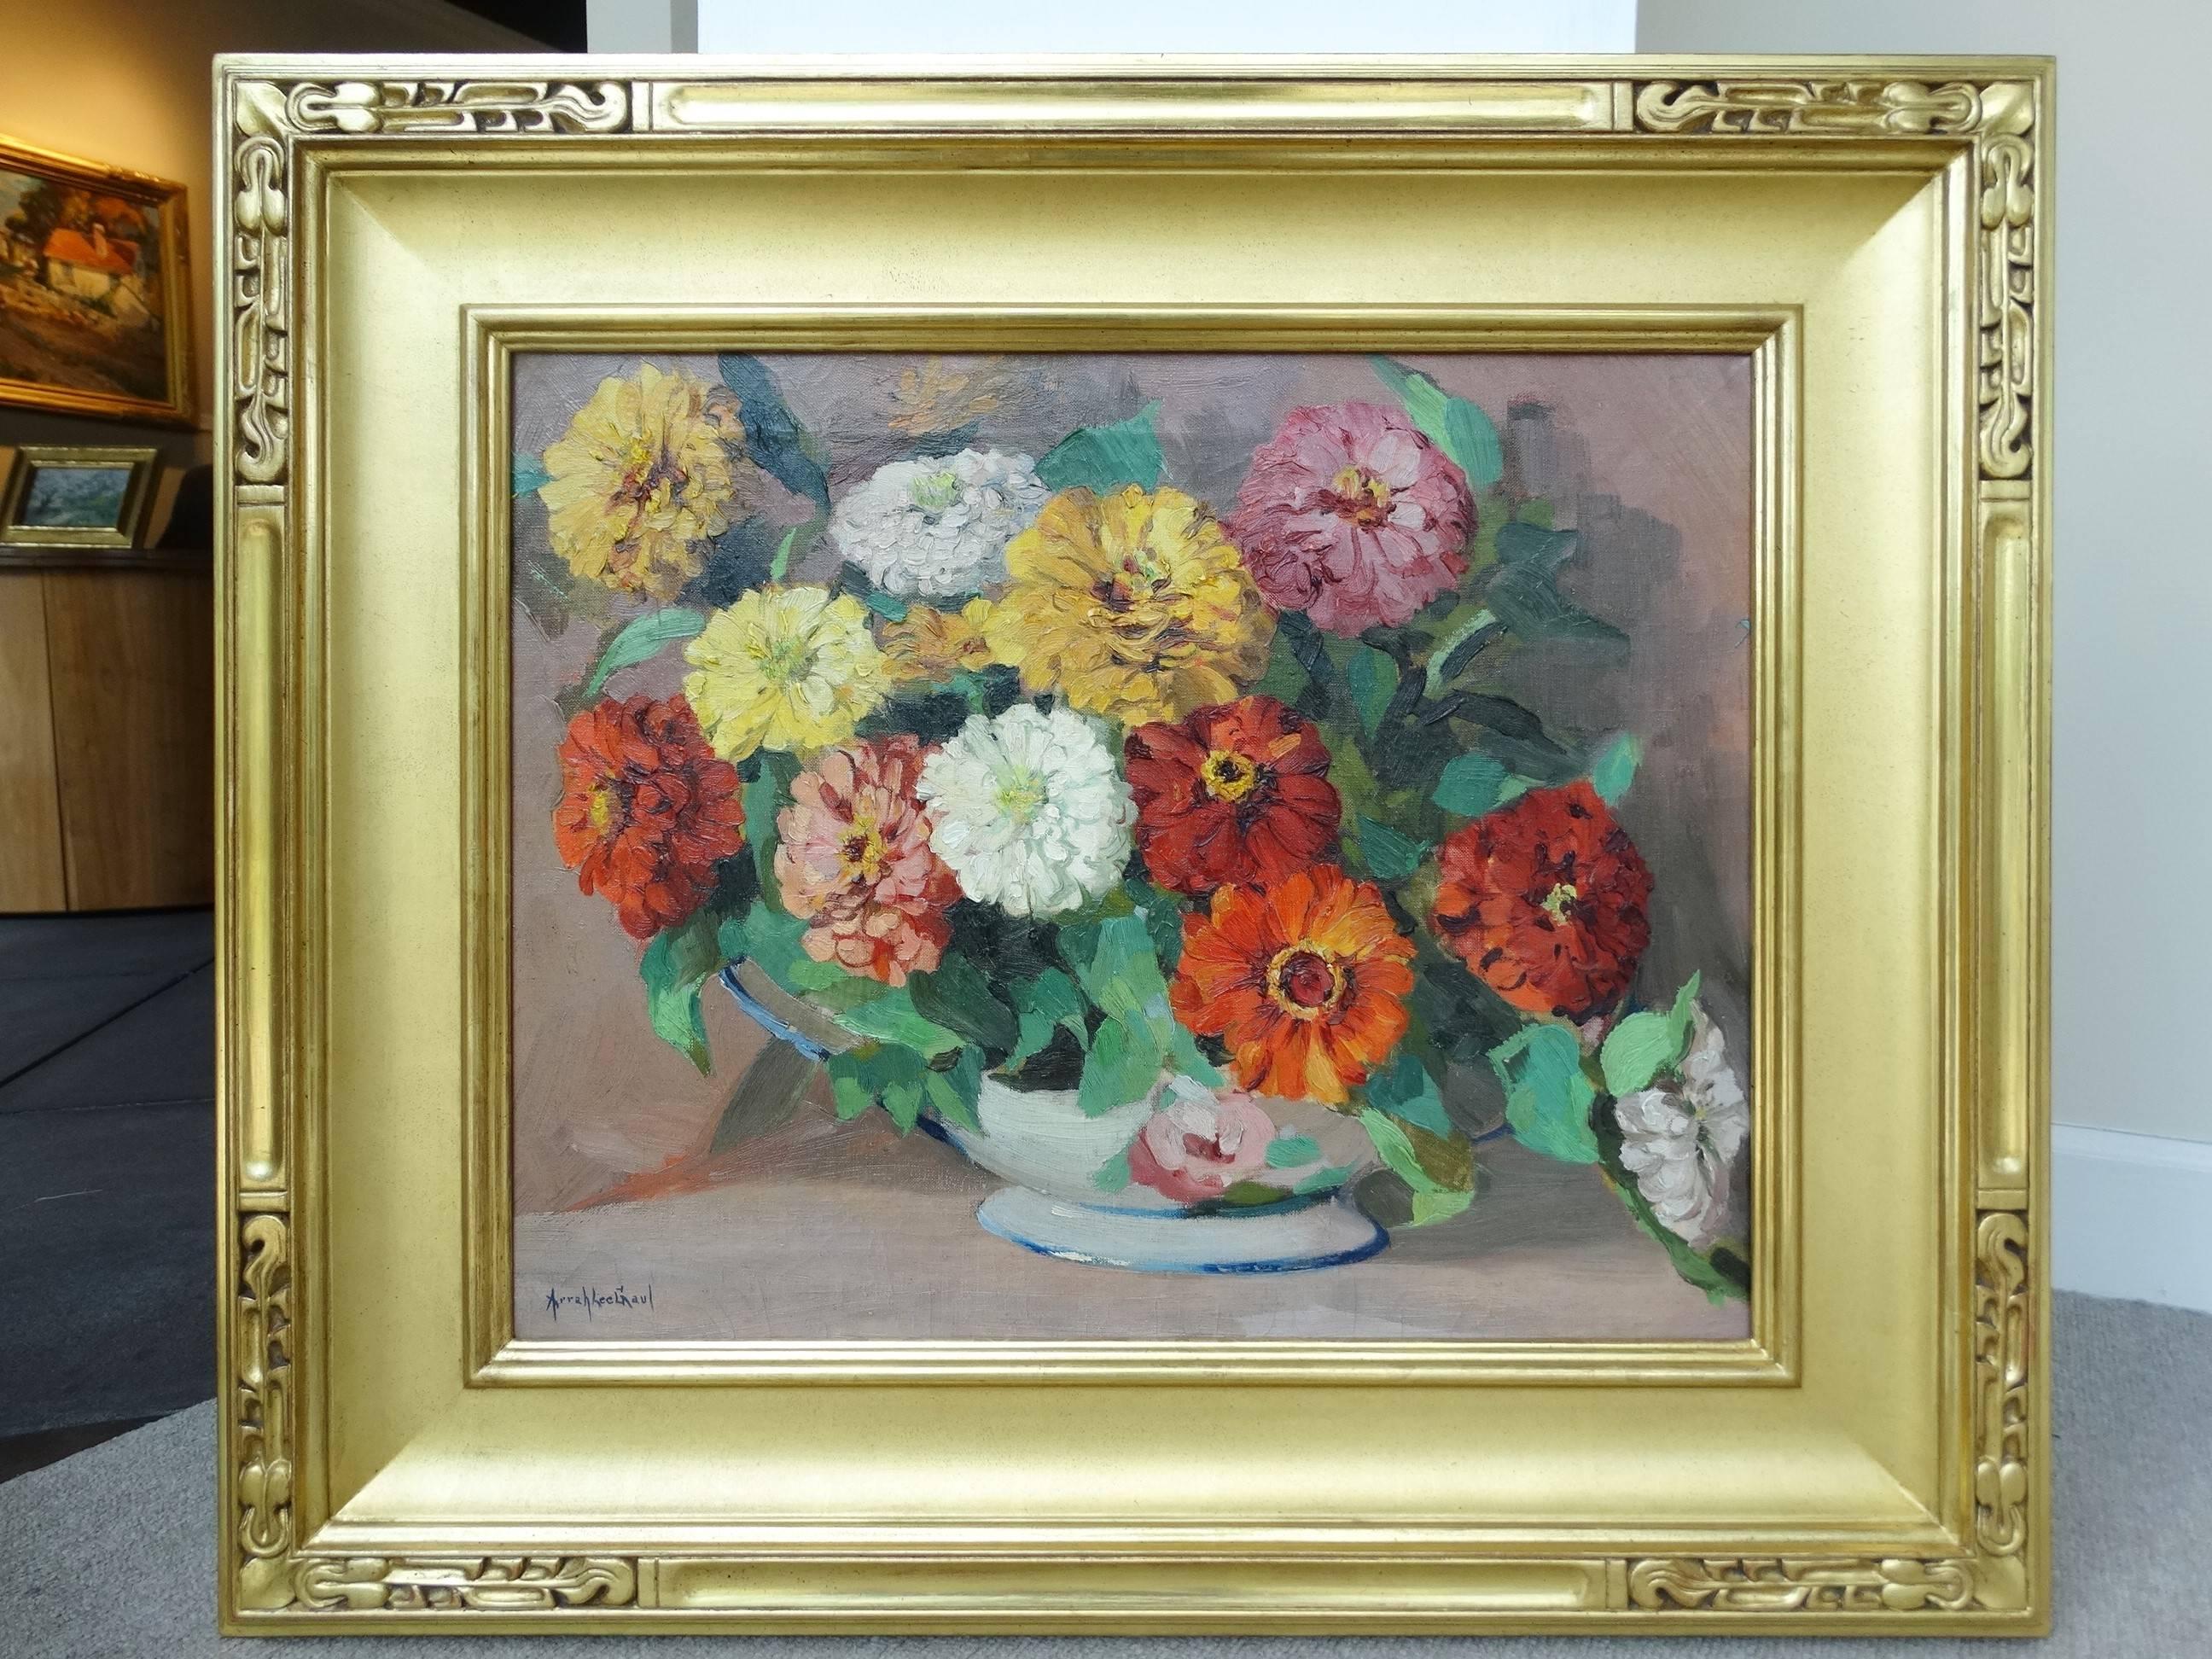 24.5 x 28.5 inches framed
Signed Lower Left

A beautiful bowl of white, chartreuse, yellow, orange, red and lilac zinnias with green foliage. A very bright and lively floral oil on canvas, rich and vibrant colors pop against a gold-leafed